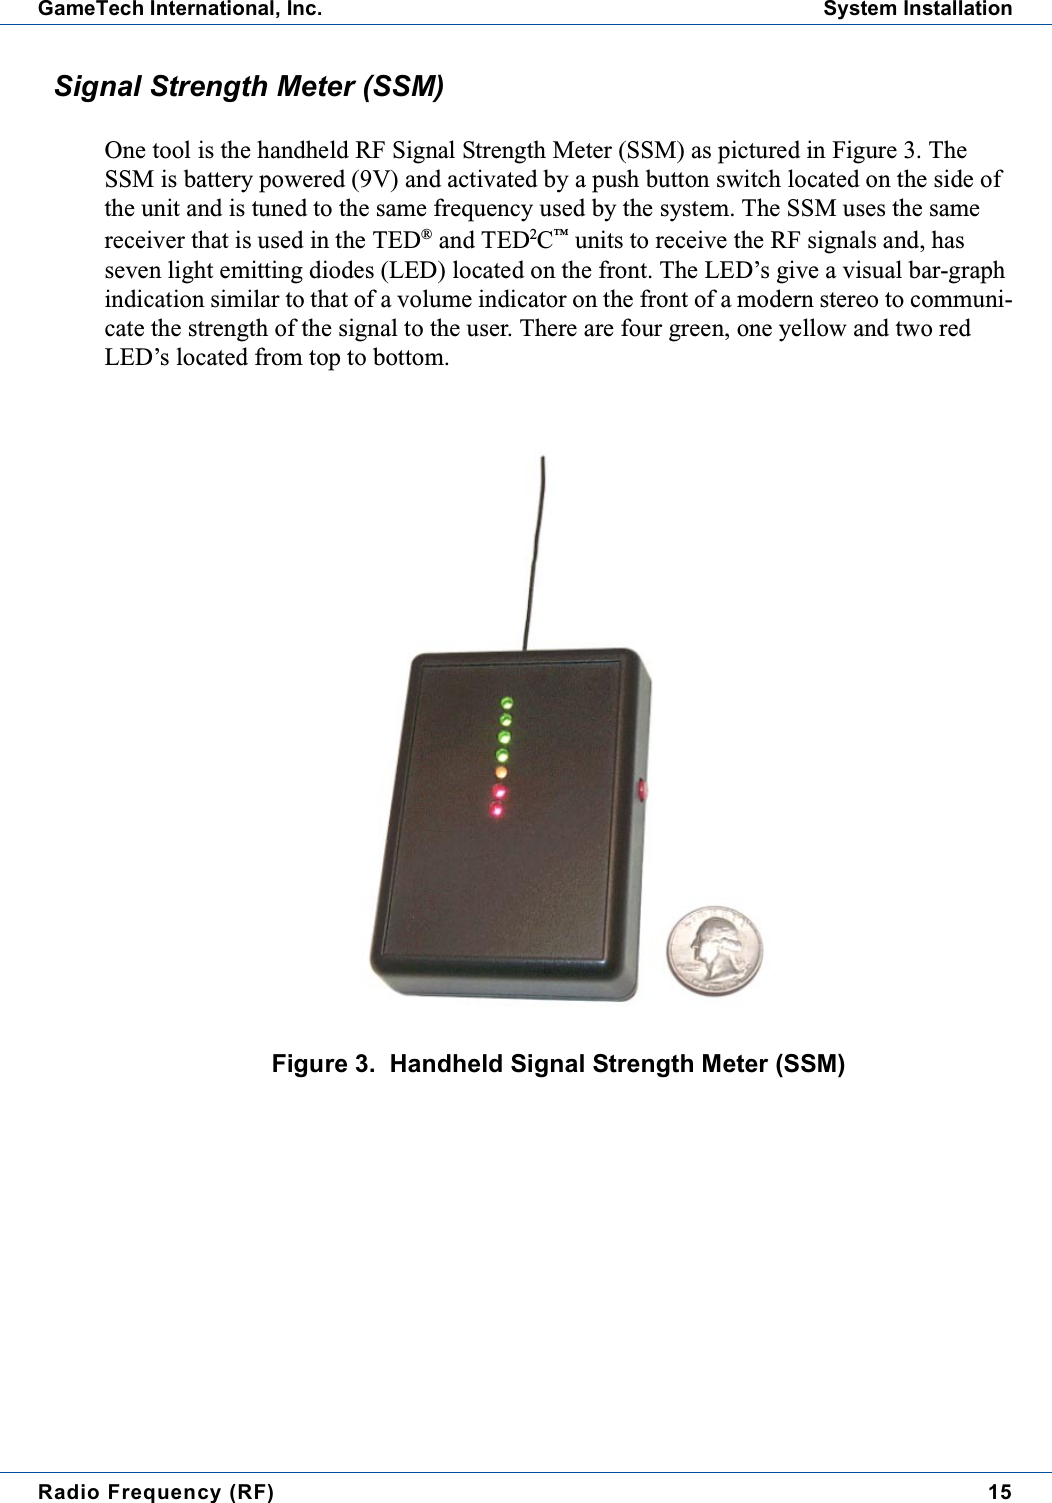 Radio Frequency (RF) 15GameTech International, Inc. System InstallationSignal Strength Meter (SSM)One tool is the handheld RF Signal Strength Meter (SSM) as pictured in Figure 3. TheSSM is battery powered (9V) and activated by a push button switch located on the side ofthe unit and is tuned to the same frequency used by the system. The SSM uses the samereceiver that is used in the TED®and TED2C™units to receive the RF signals and, hasseven light emitting diodes (LED) located on the front. The LED’s give a visual bar-graphindication similar to that of a volume indicator on the front of a modern stereo to communi-cate the strength of the signal to the user. There are four green, one yellow and two redLED’s located from top to bottom.Figure 3. Handheld Signal Strength Meter (SSM)